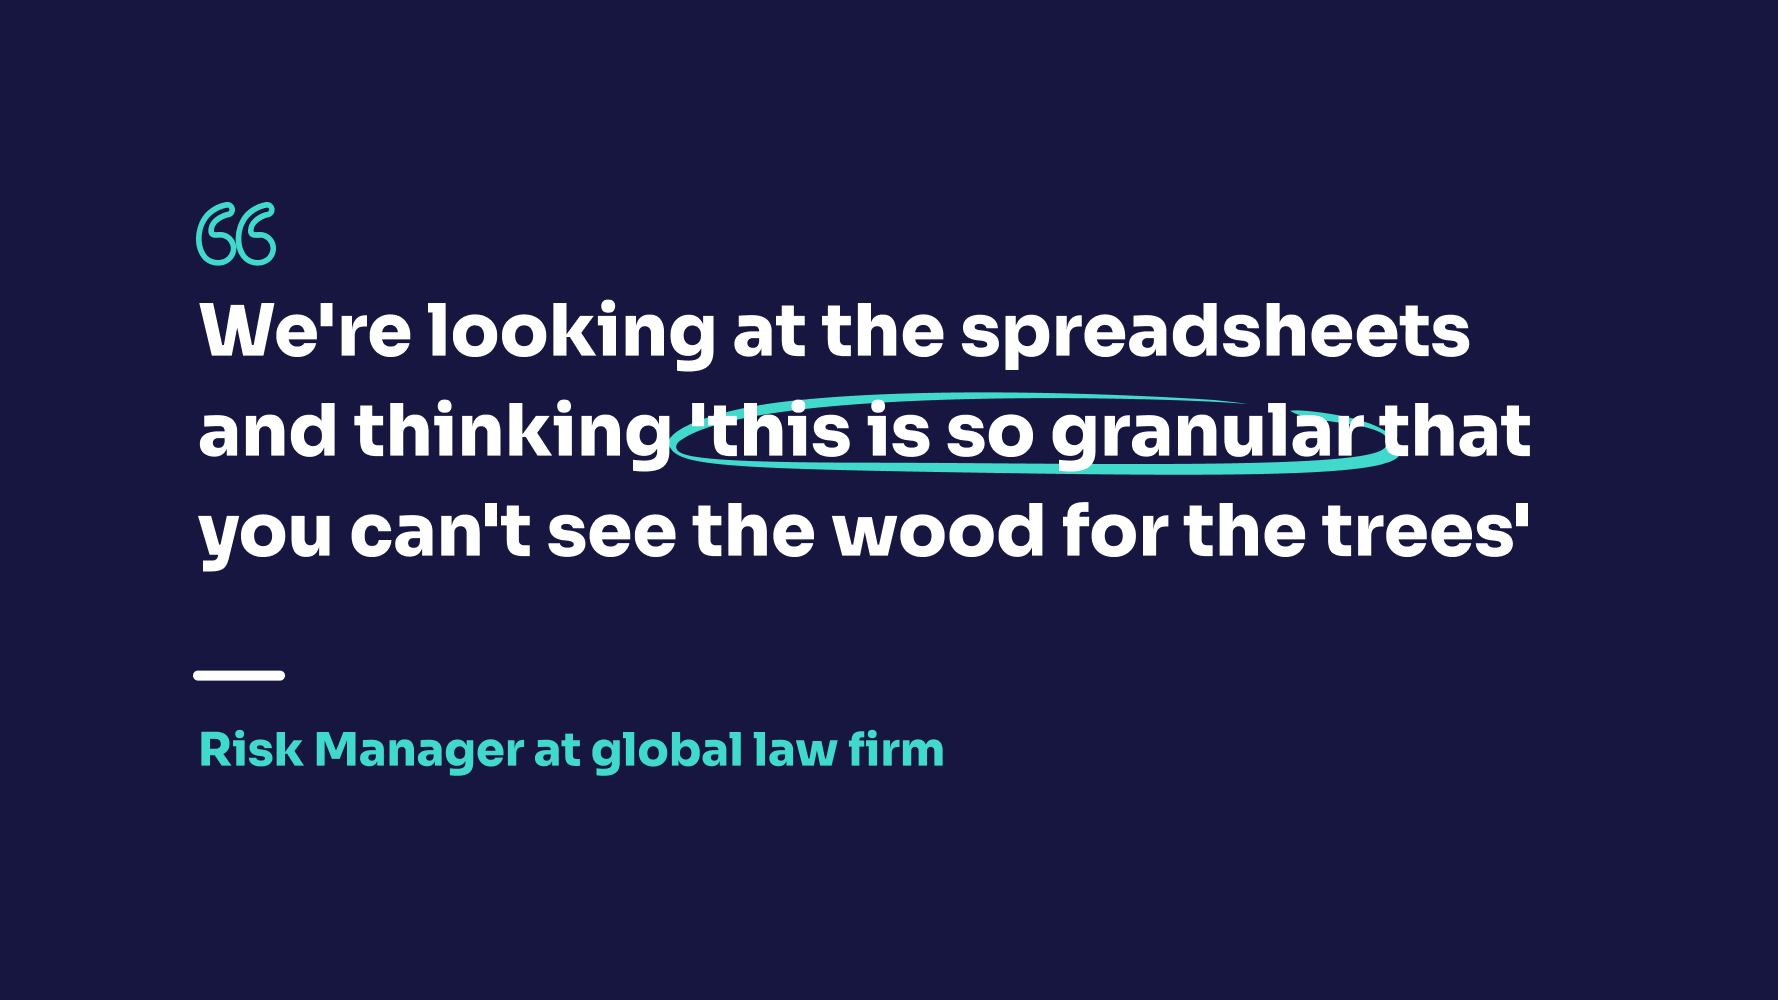 A quote from a Risk Manager at a global law firm highlighting the importance of enterprise risk management software. It says "We're looking at the spreadsheets and thinking 'this is so granular that you can't see the wood for the trees'".